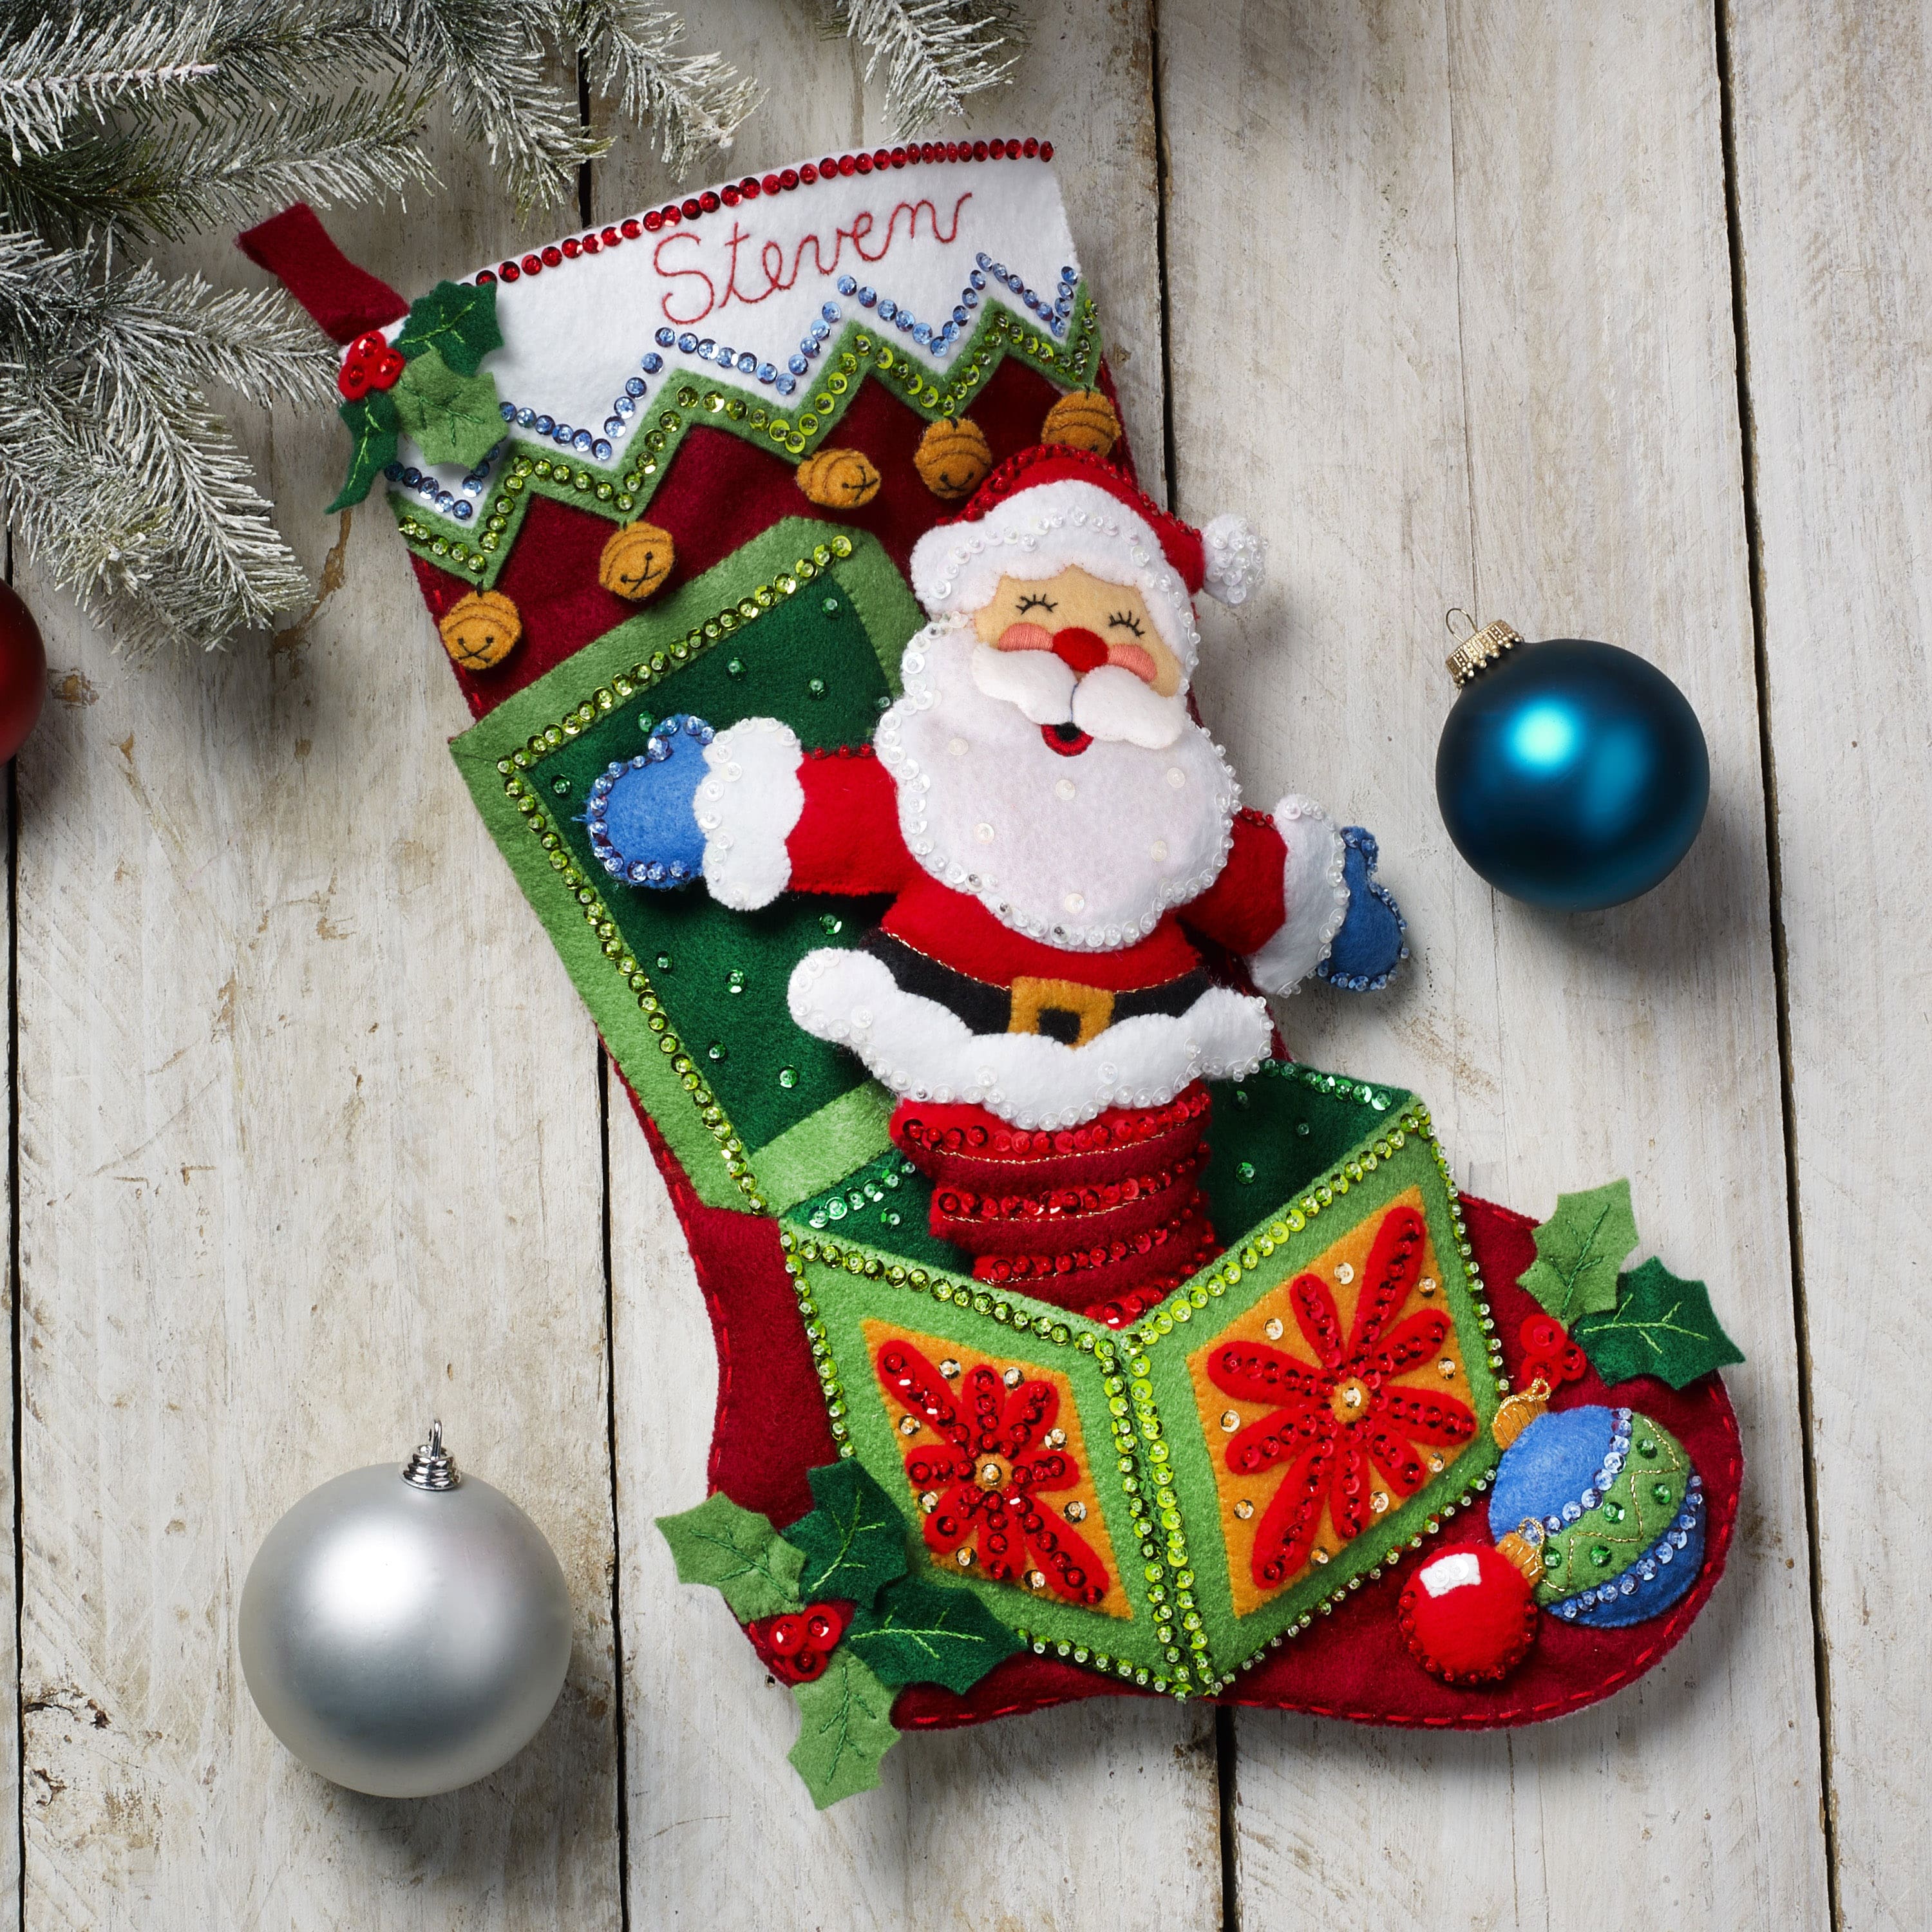 Design Works choice felt Christmas stocking kits see pictures and